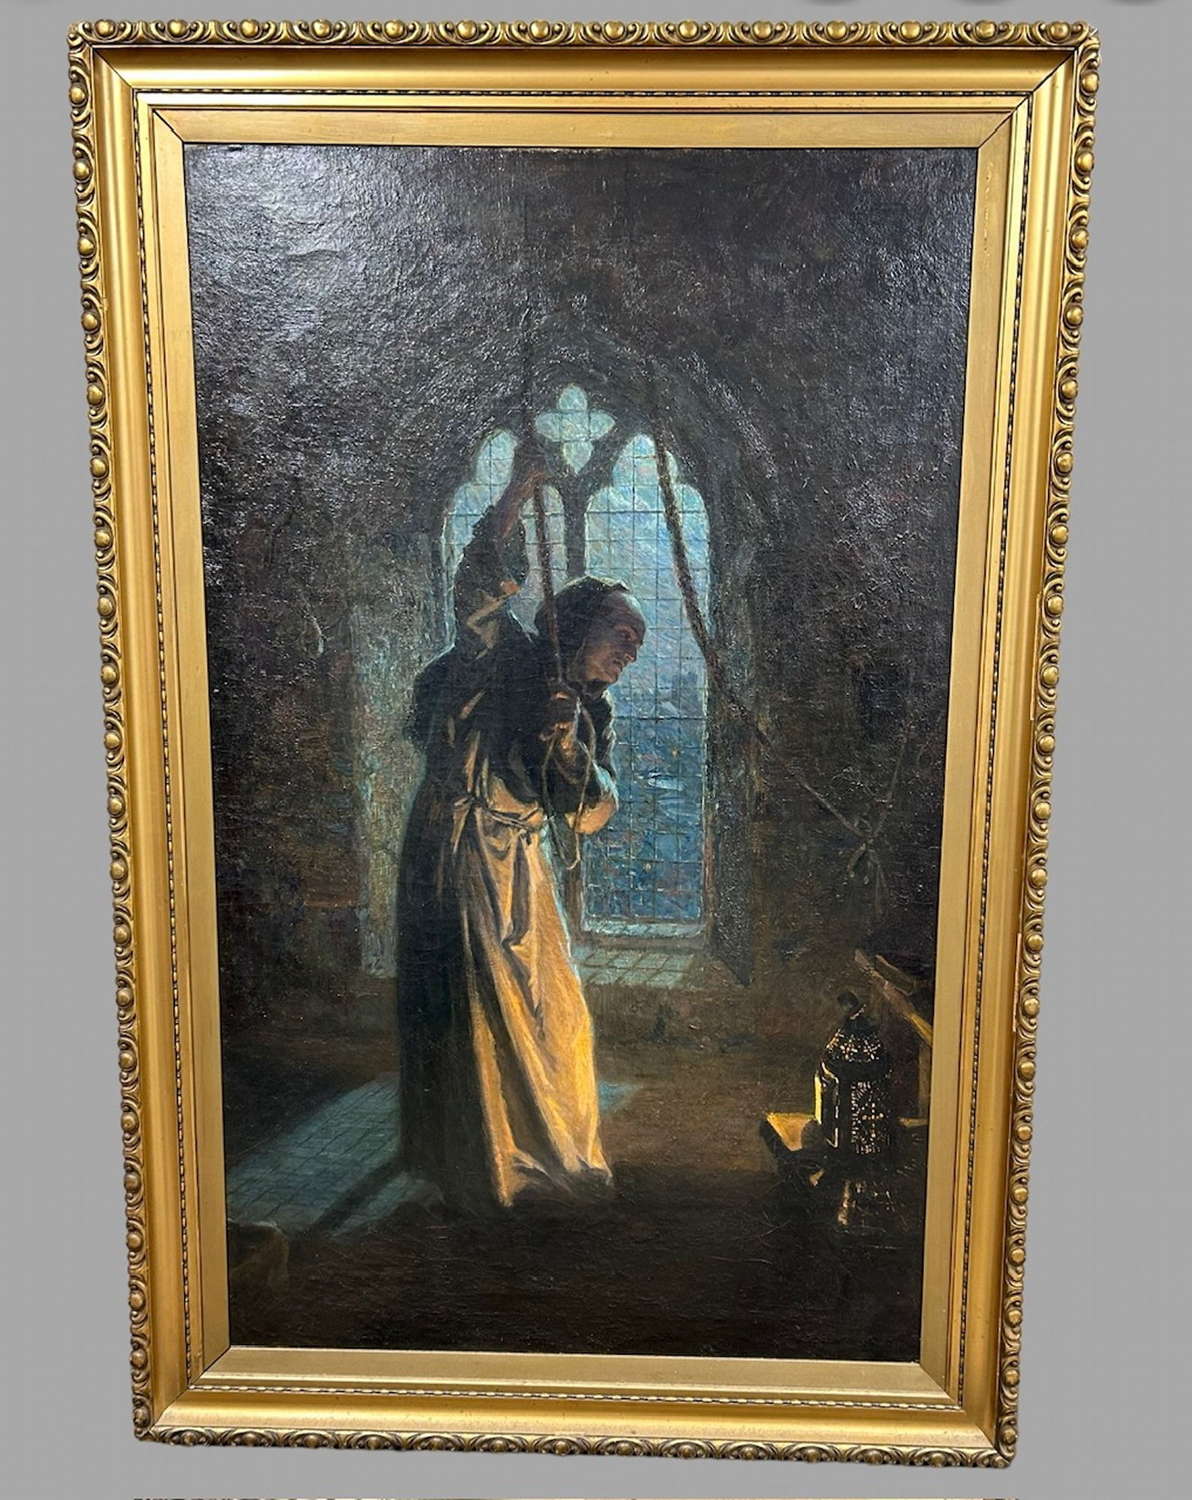 Karl Heilig - Large Oil on Canvas - Monk Bell Toiling